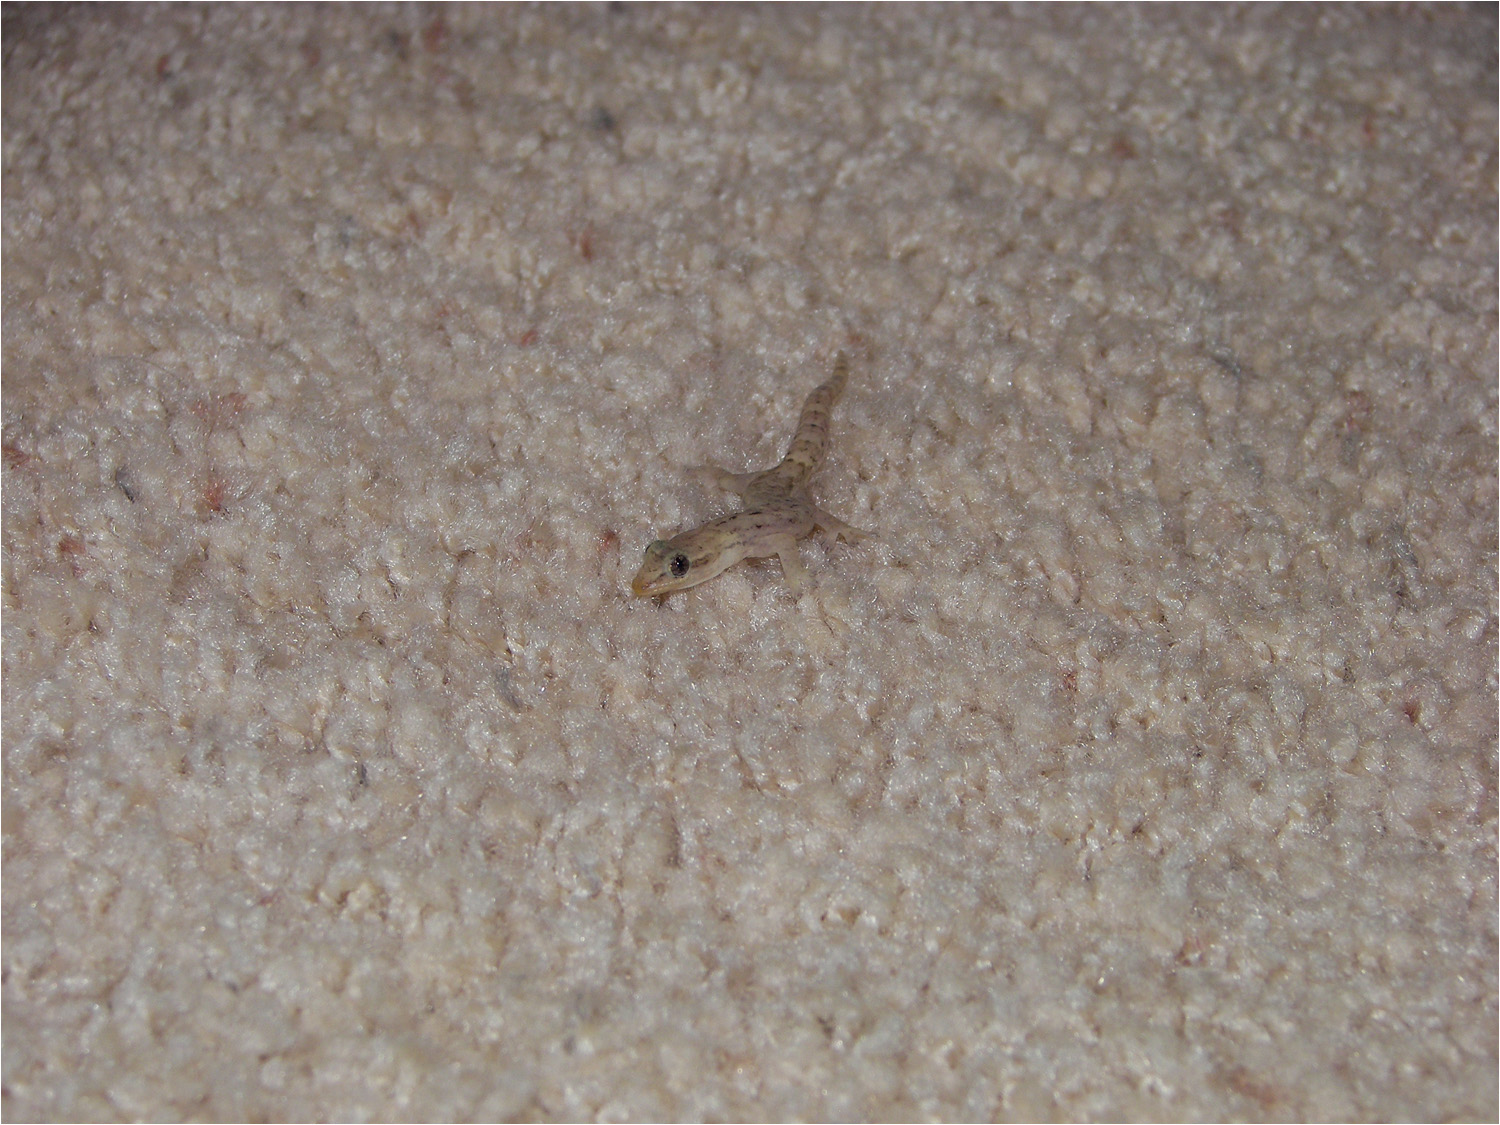 Gecko in our bedroom